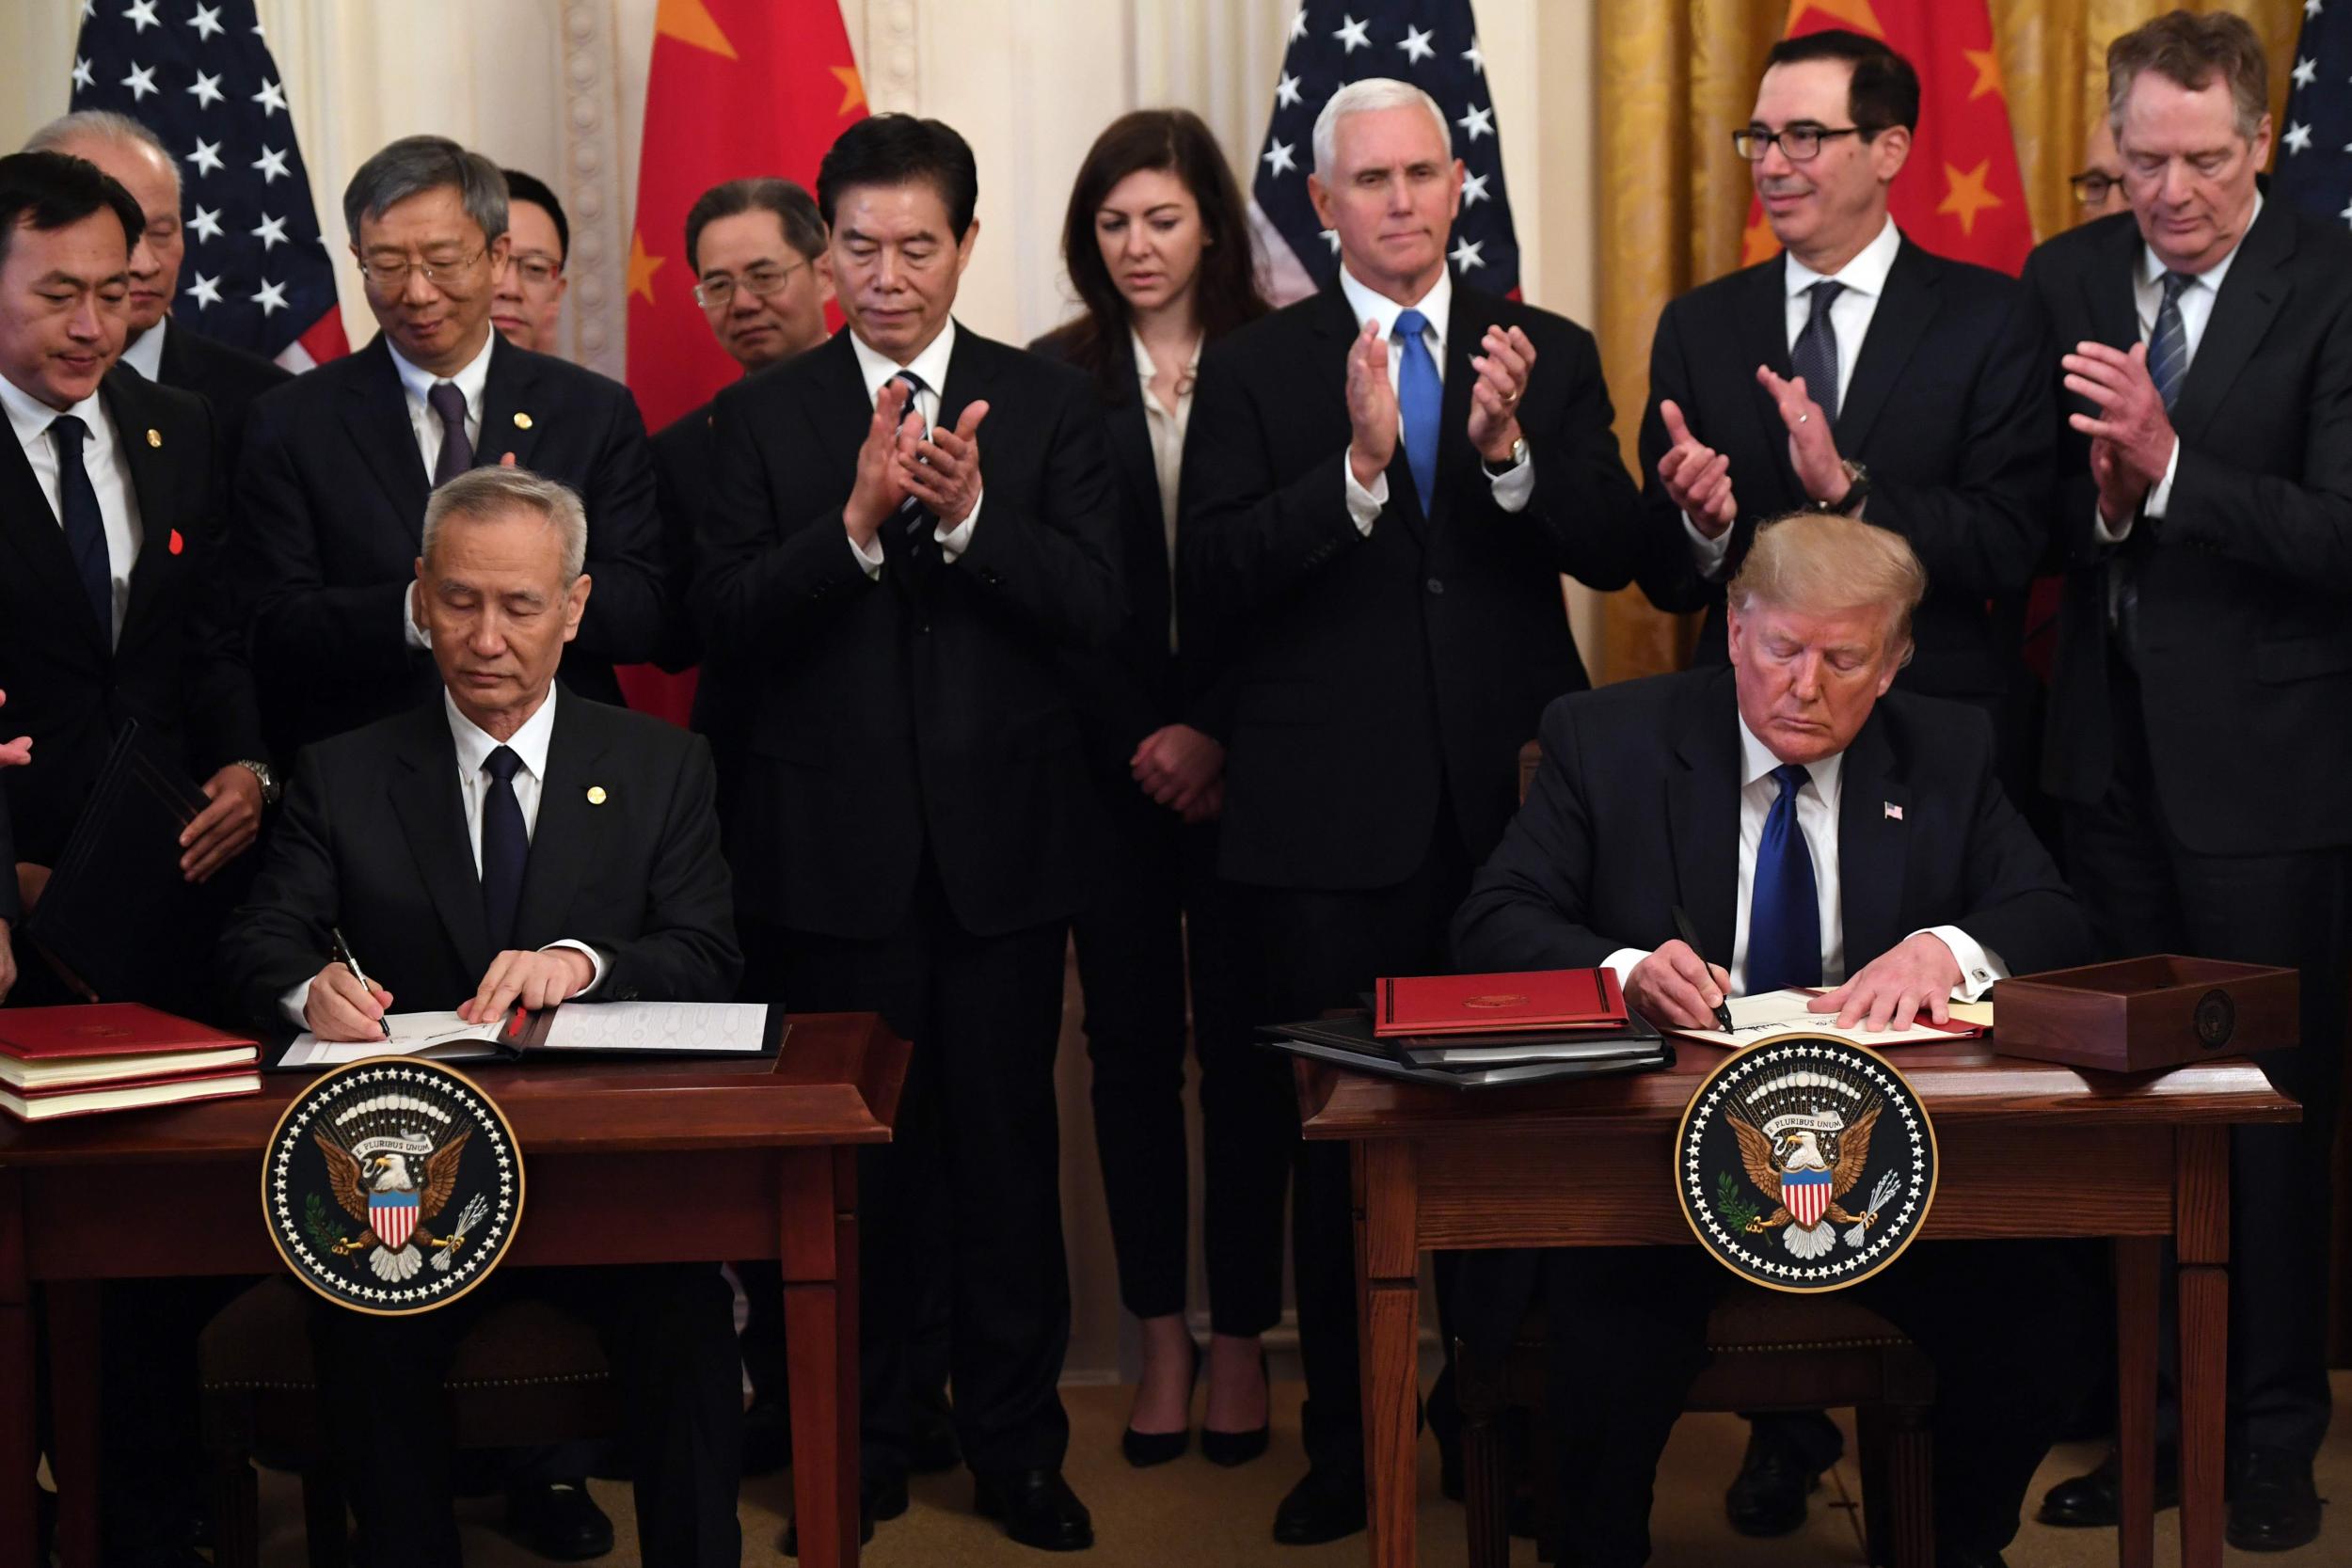 Donald Trump, and China's Vice Premier Liu He, the country's top trade negotiator, sign a trade agreement between the US and China during a ceremony in the East Room of the White House